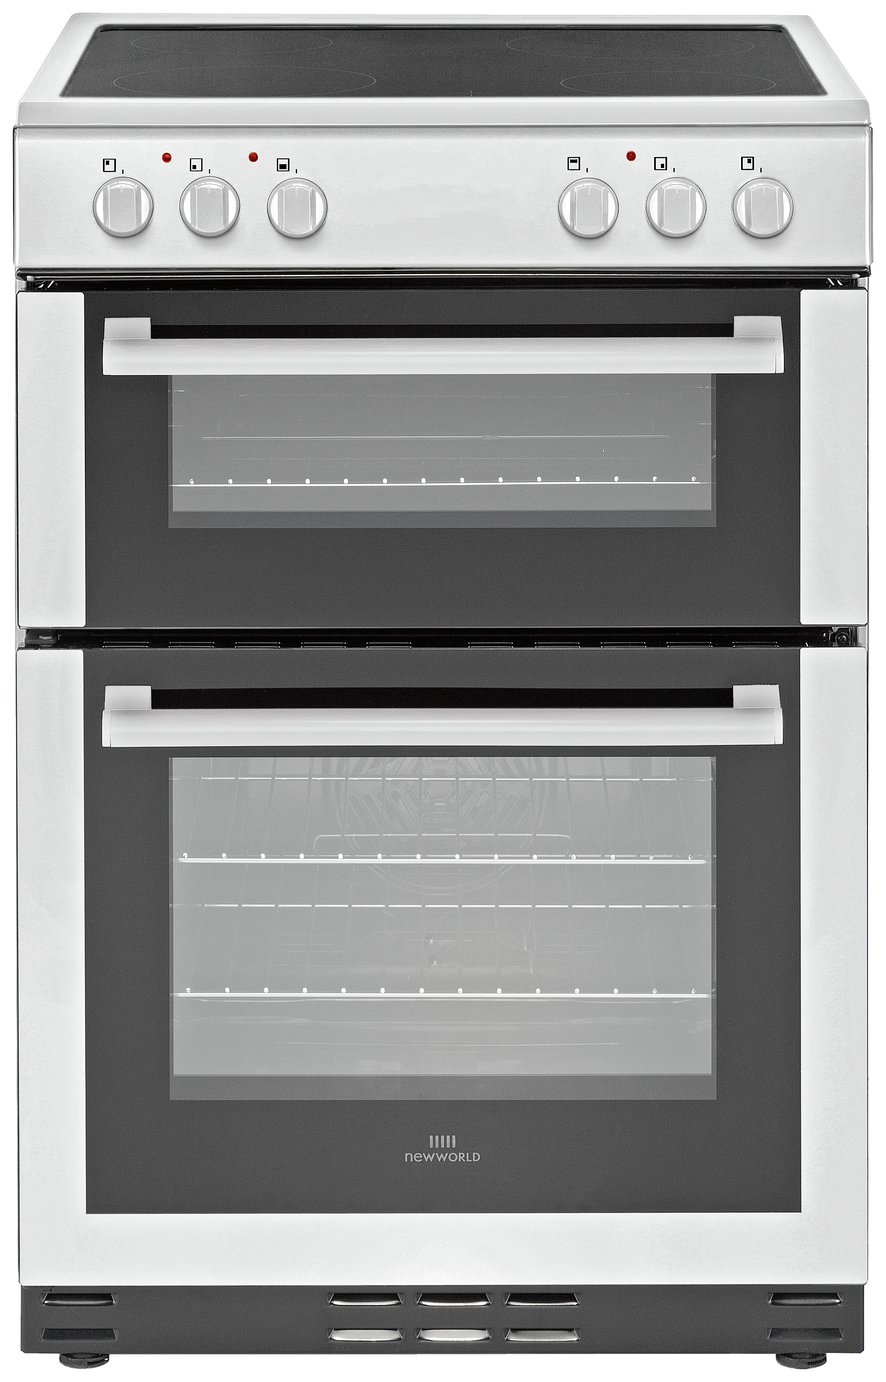 New World - 60EDOC Electric Cooker - White